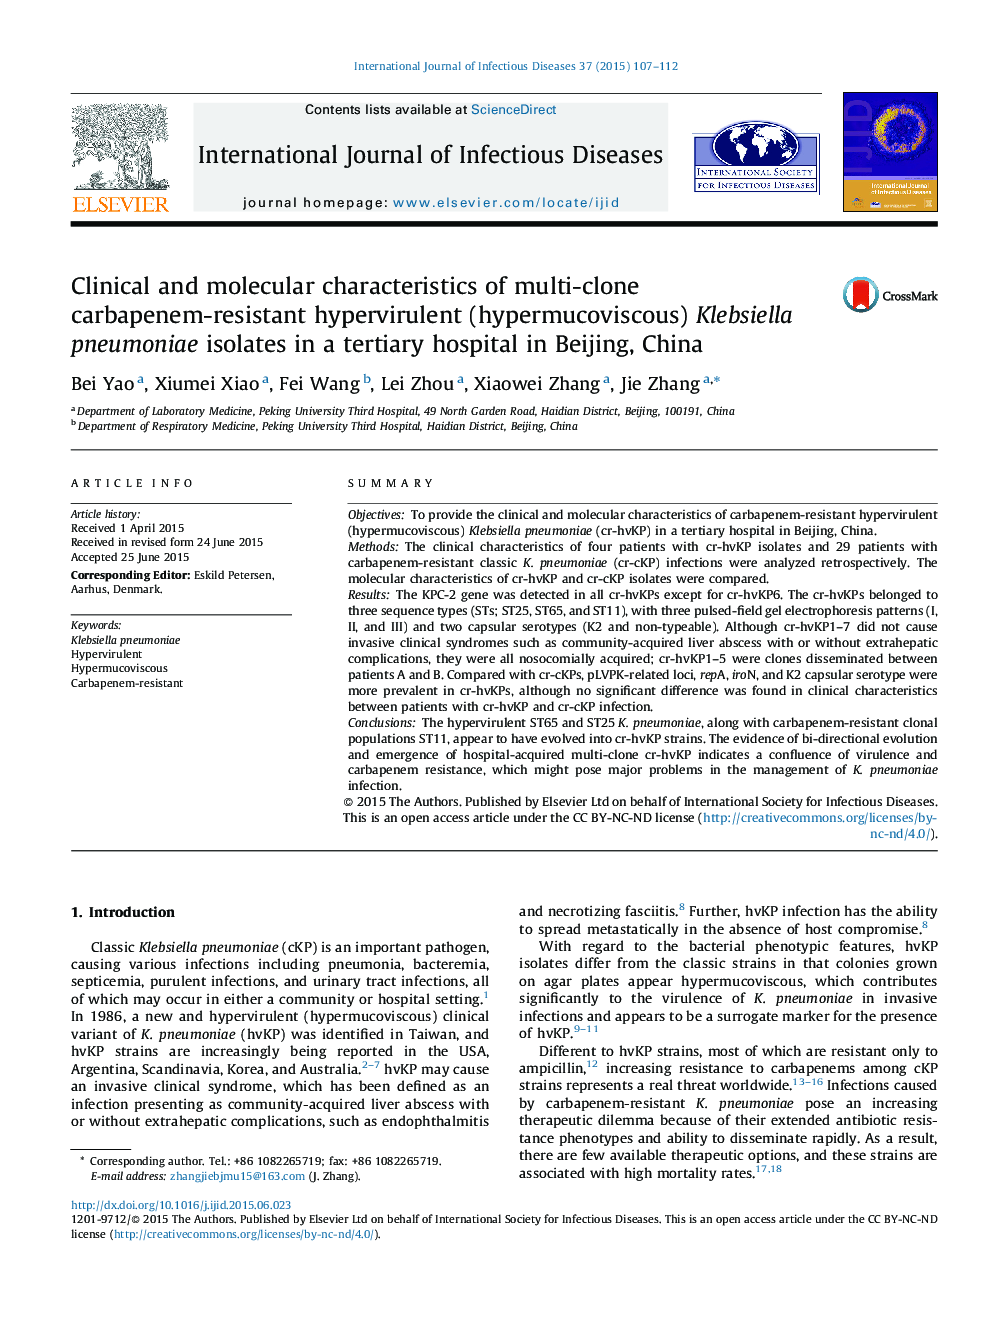 Clinical and molecular characteristics of multi-clone carbapenem-resistant hypervirulent (hypermucoviscous) Klebsiella pneumoniae isolates in a tertiary hospital in Beijing, China